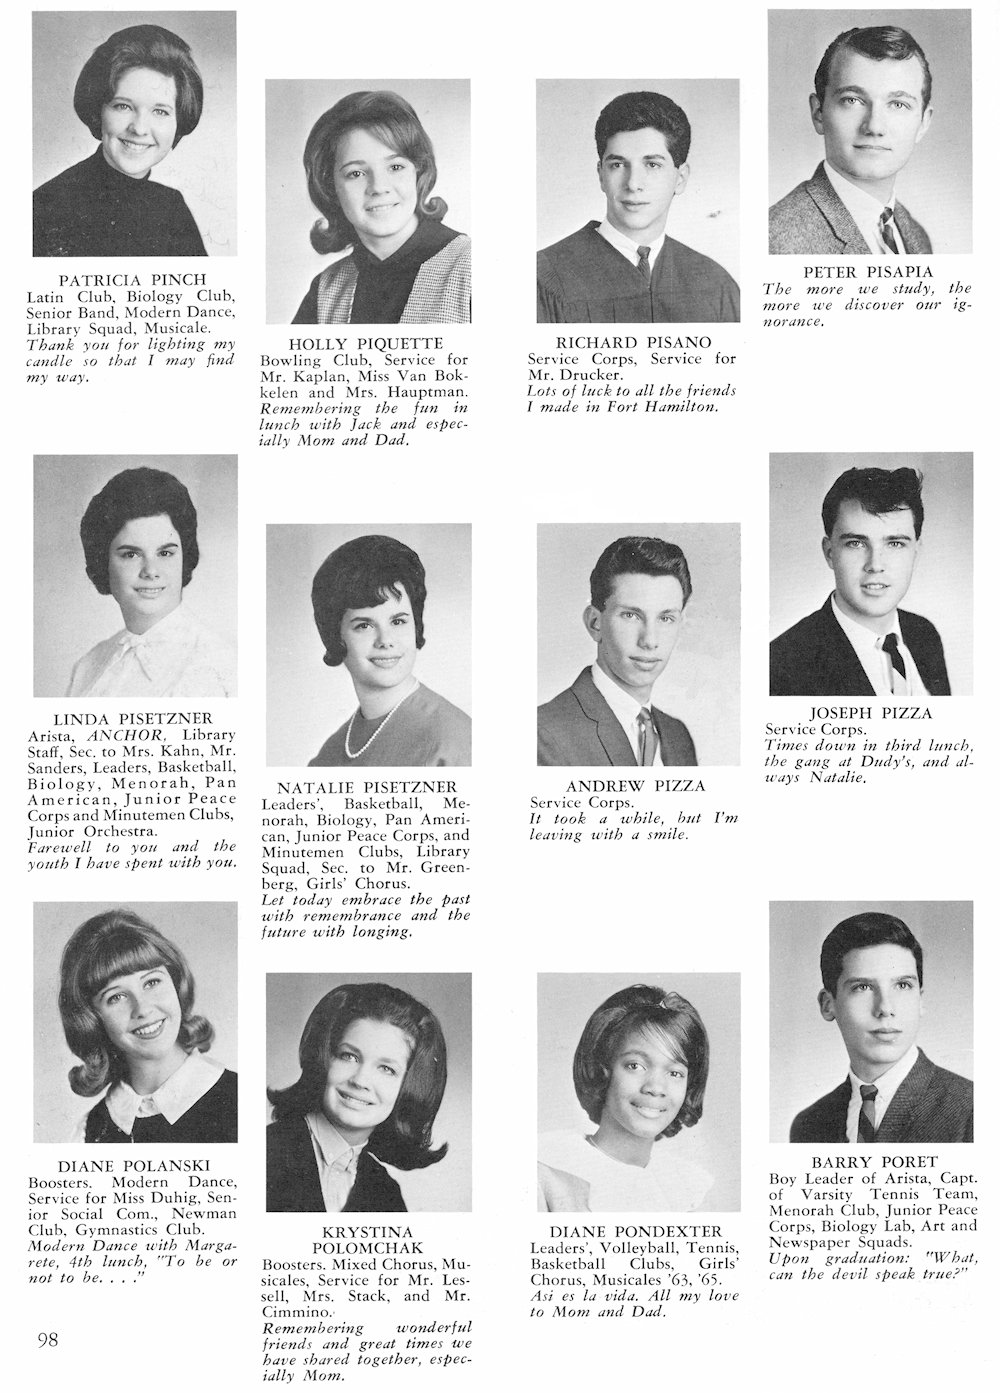 Pinch-Poret page from Fort Hamilton High School 1965